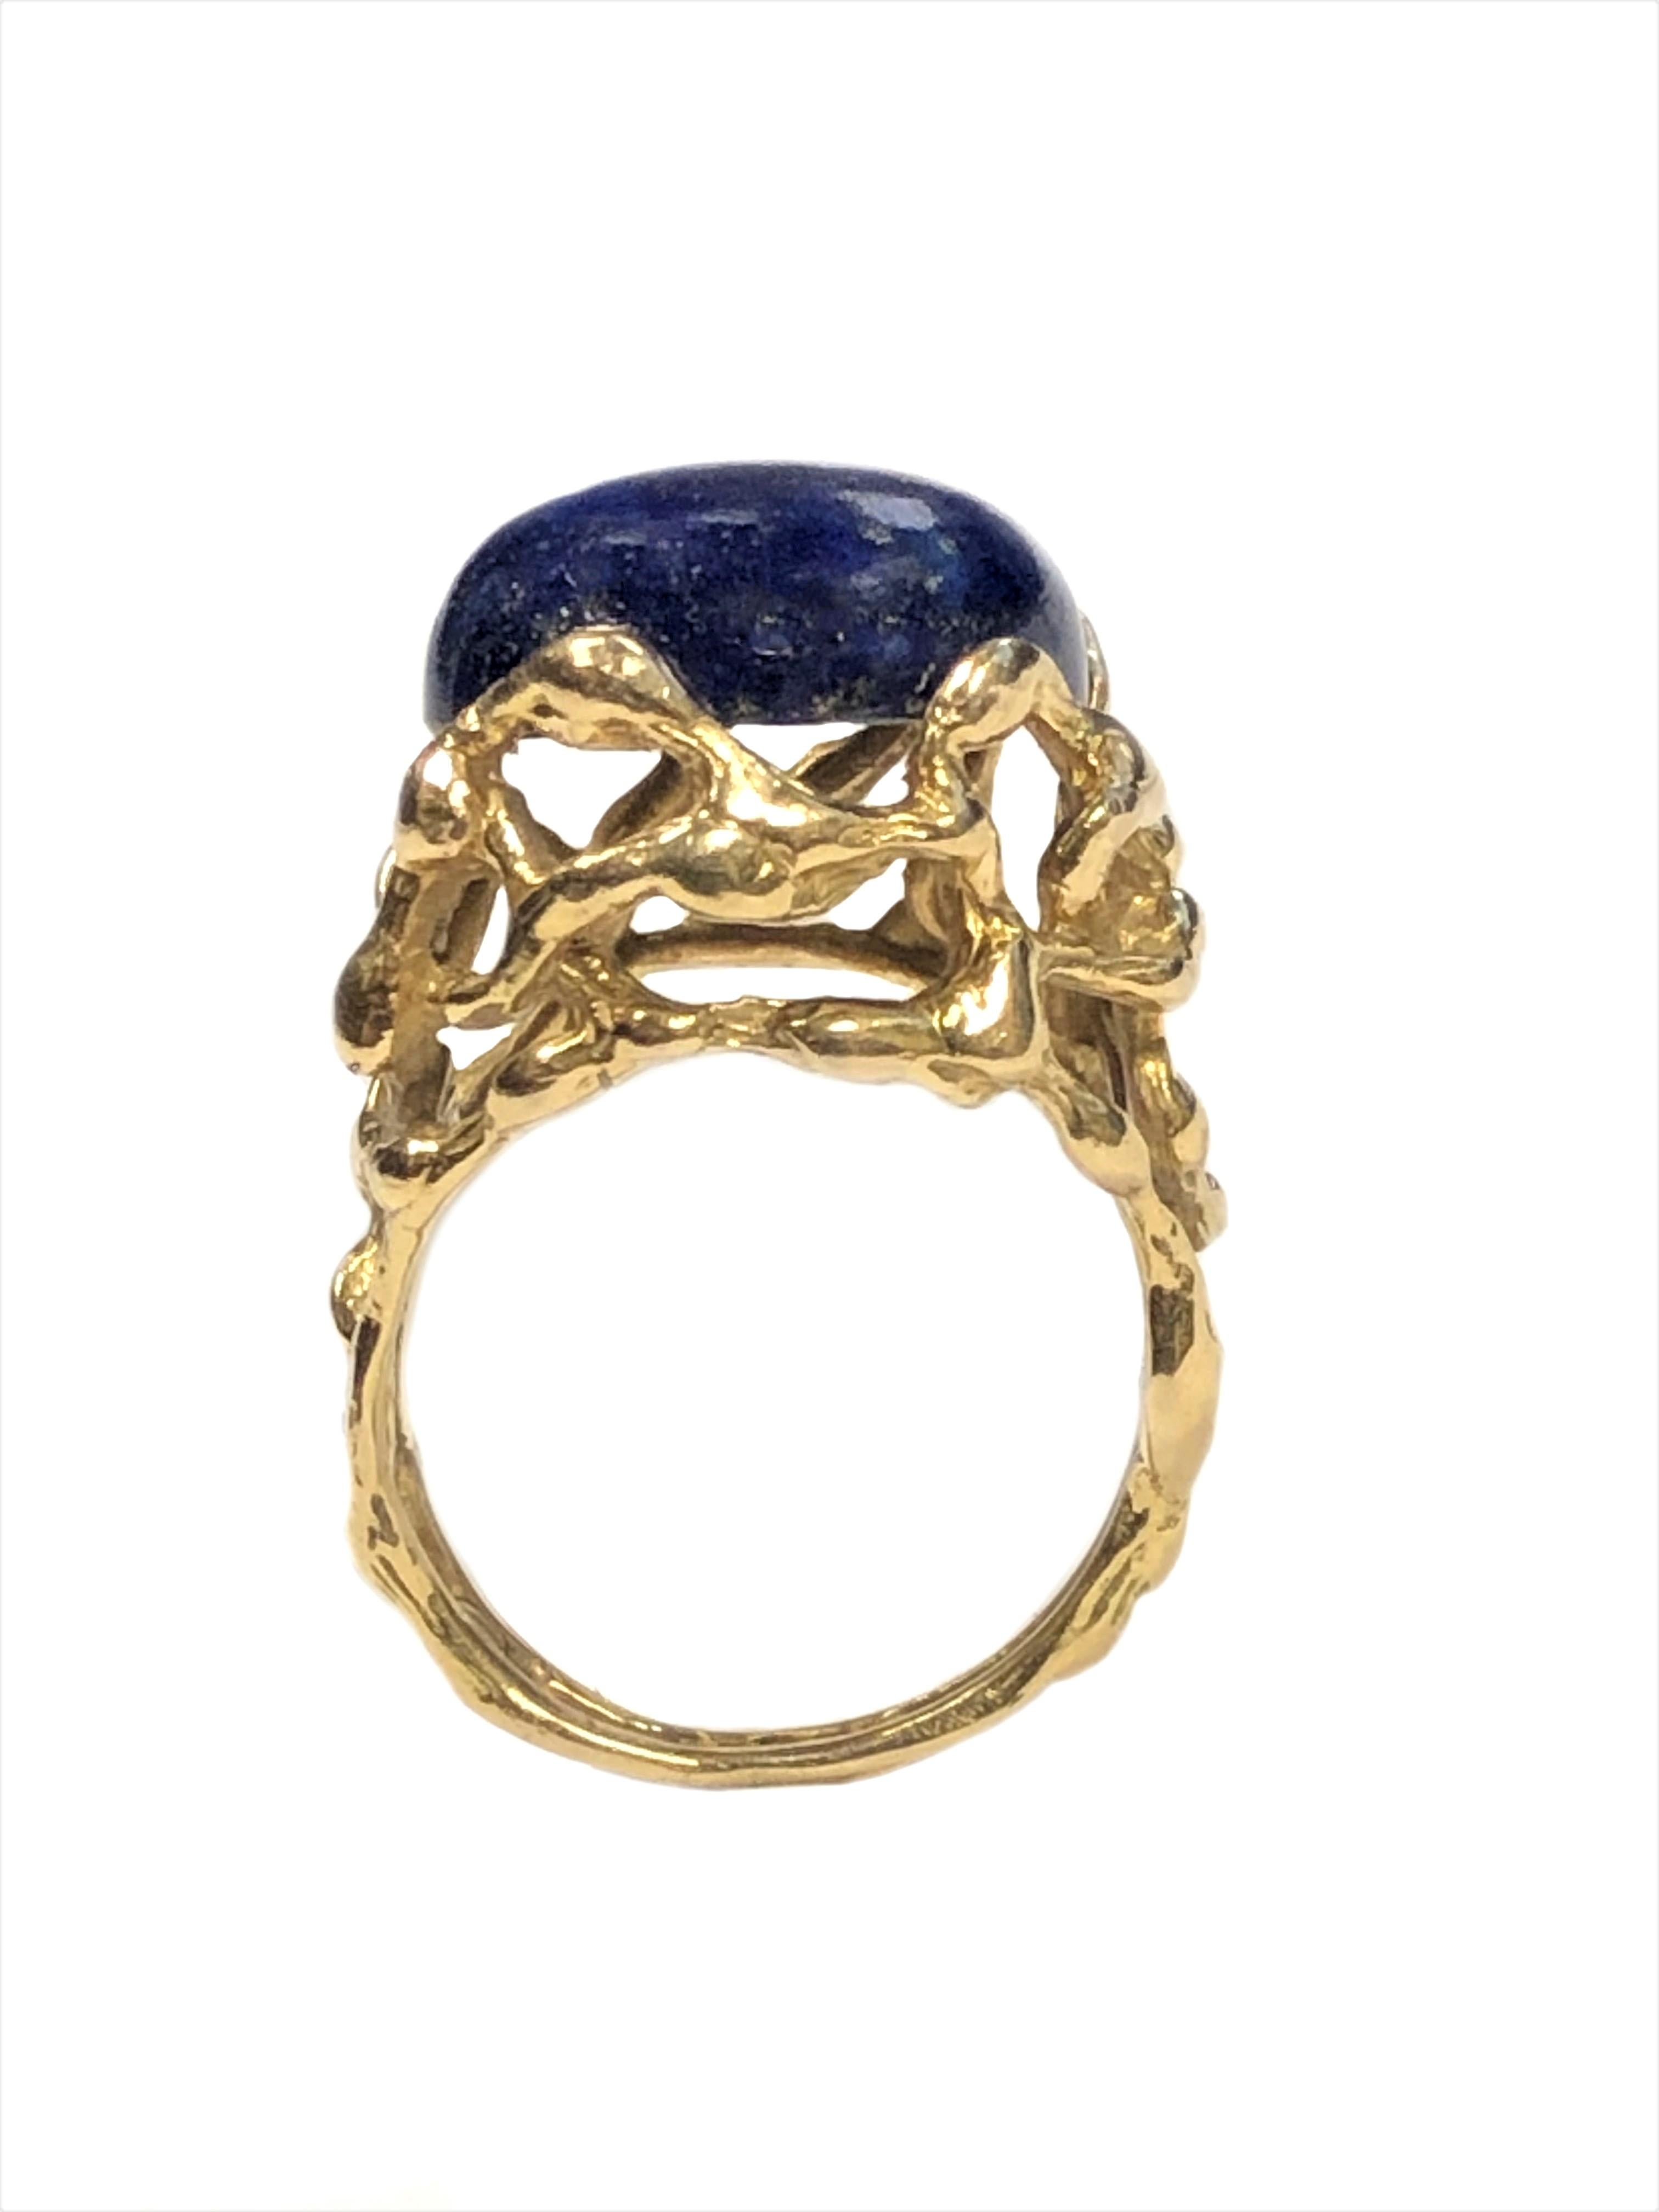 Circa 1970 Modernist Designed 18K Yellow Gold Ring by Gilbert Albert, centrally set with a Lapis Lazuli, the top of the ring measures 5/8 inch in diameter, finger size 6. 